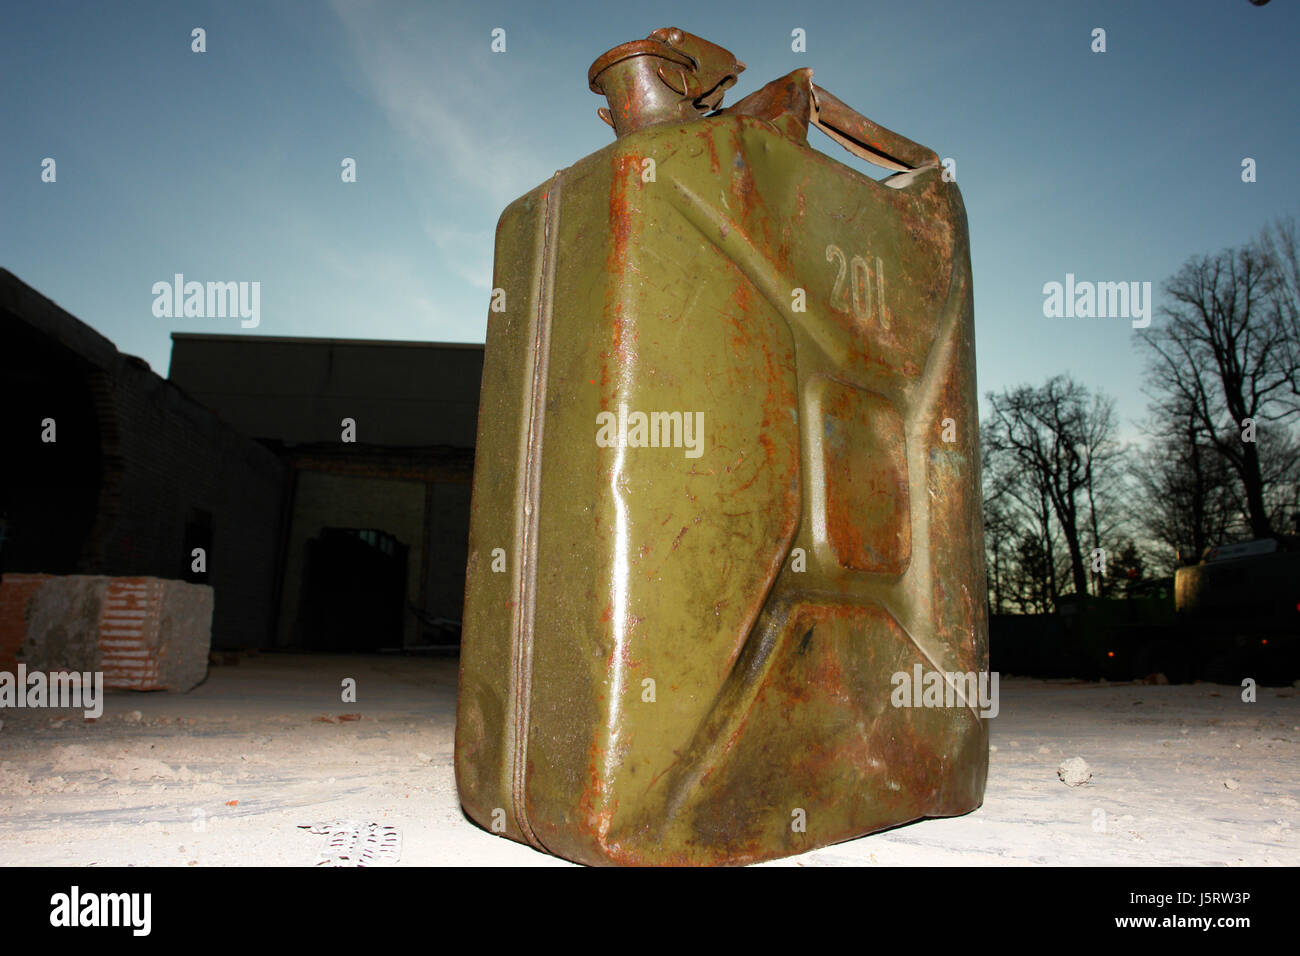 stock provision tank petrol reserve canister petrol can